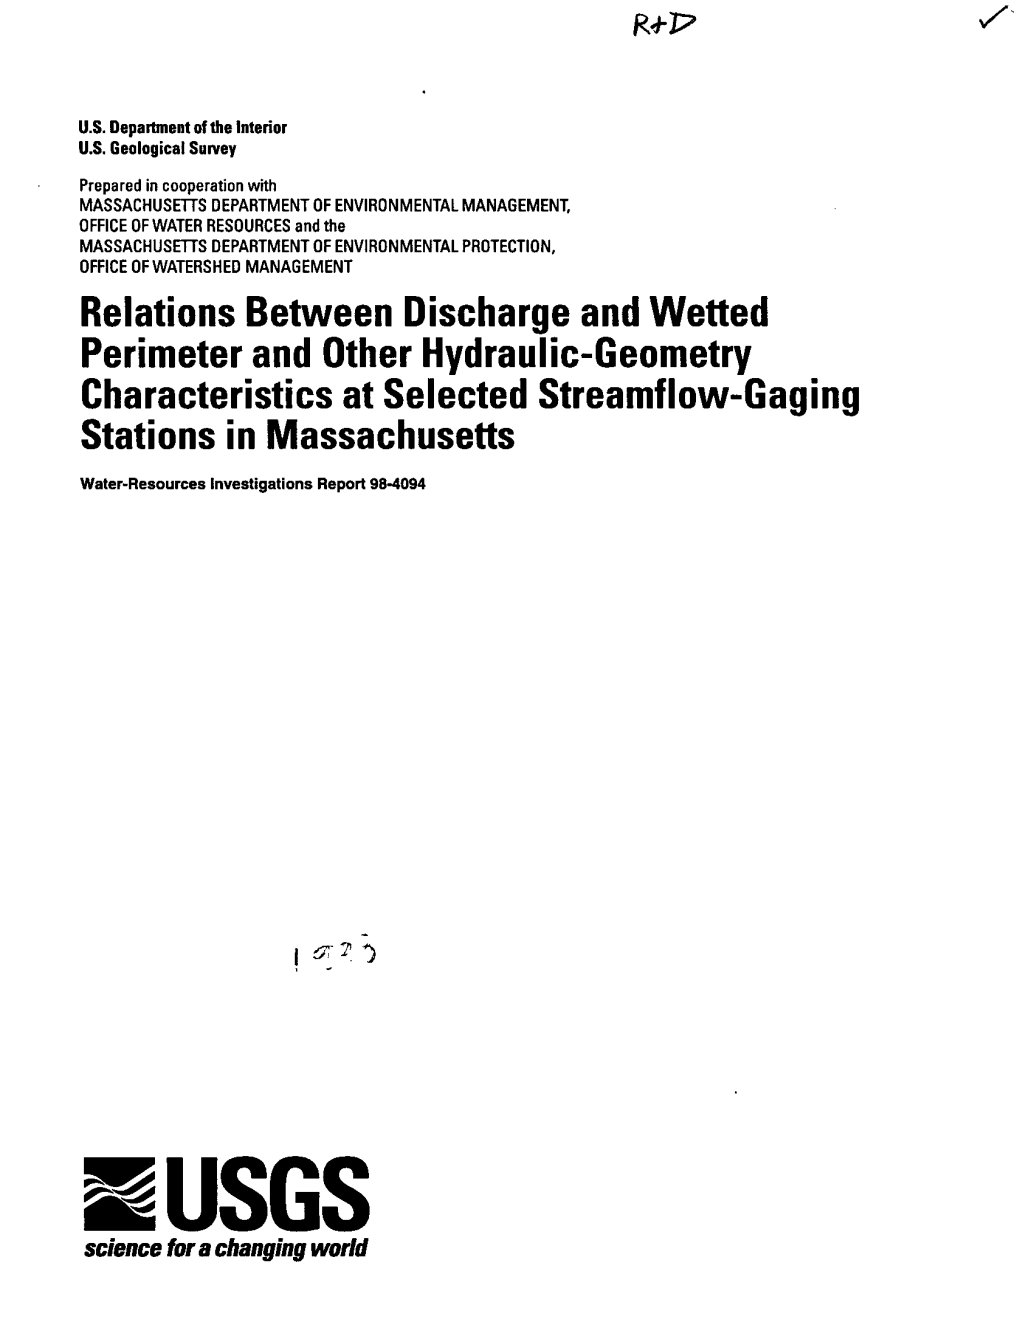 Relations Between Discharge and Wetted Perimeter and Other Hydraulic-Geometry Characteristics